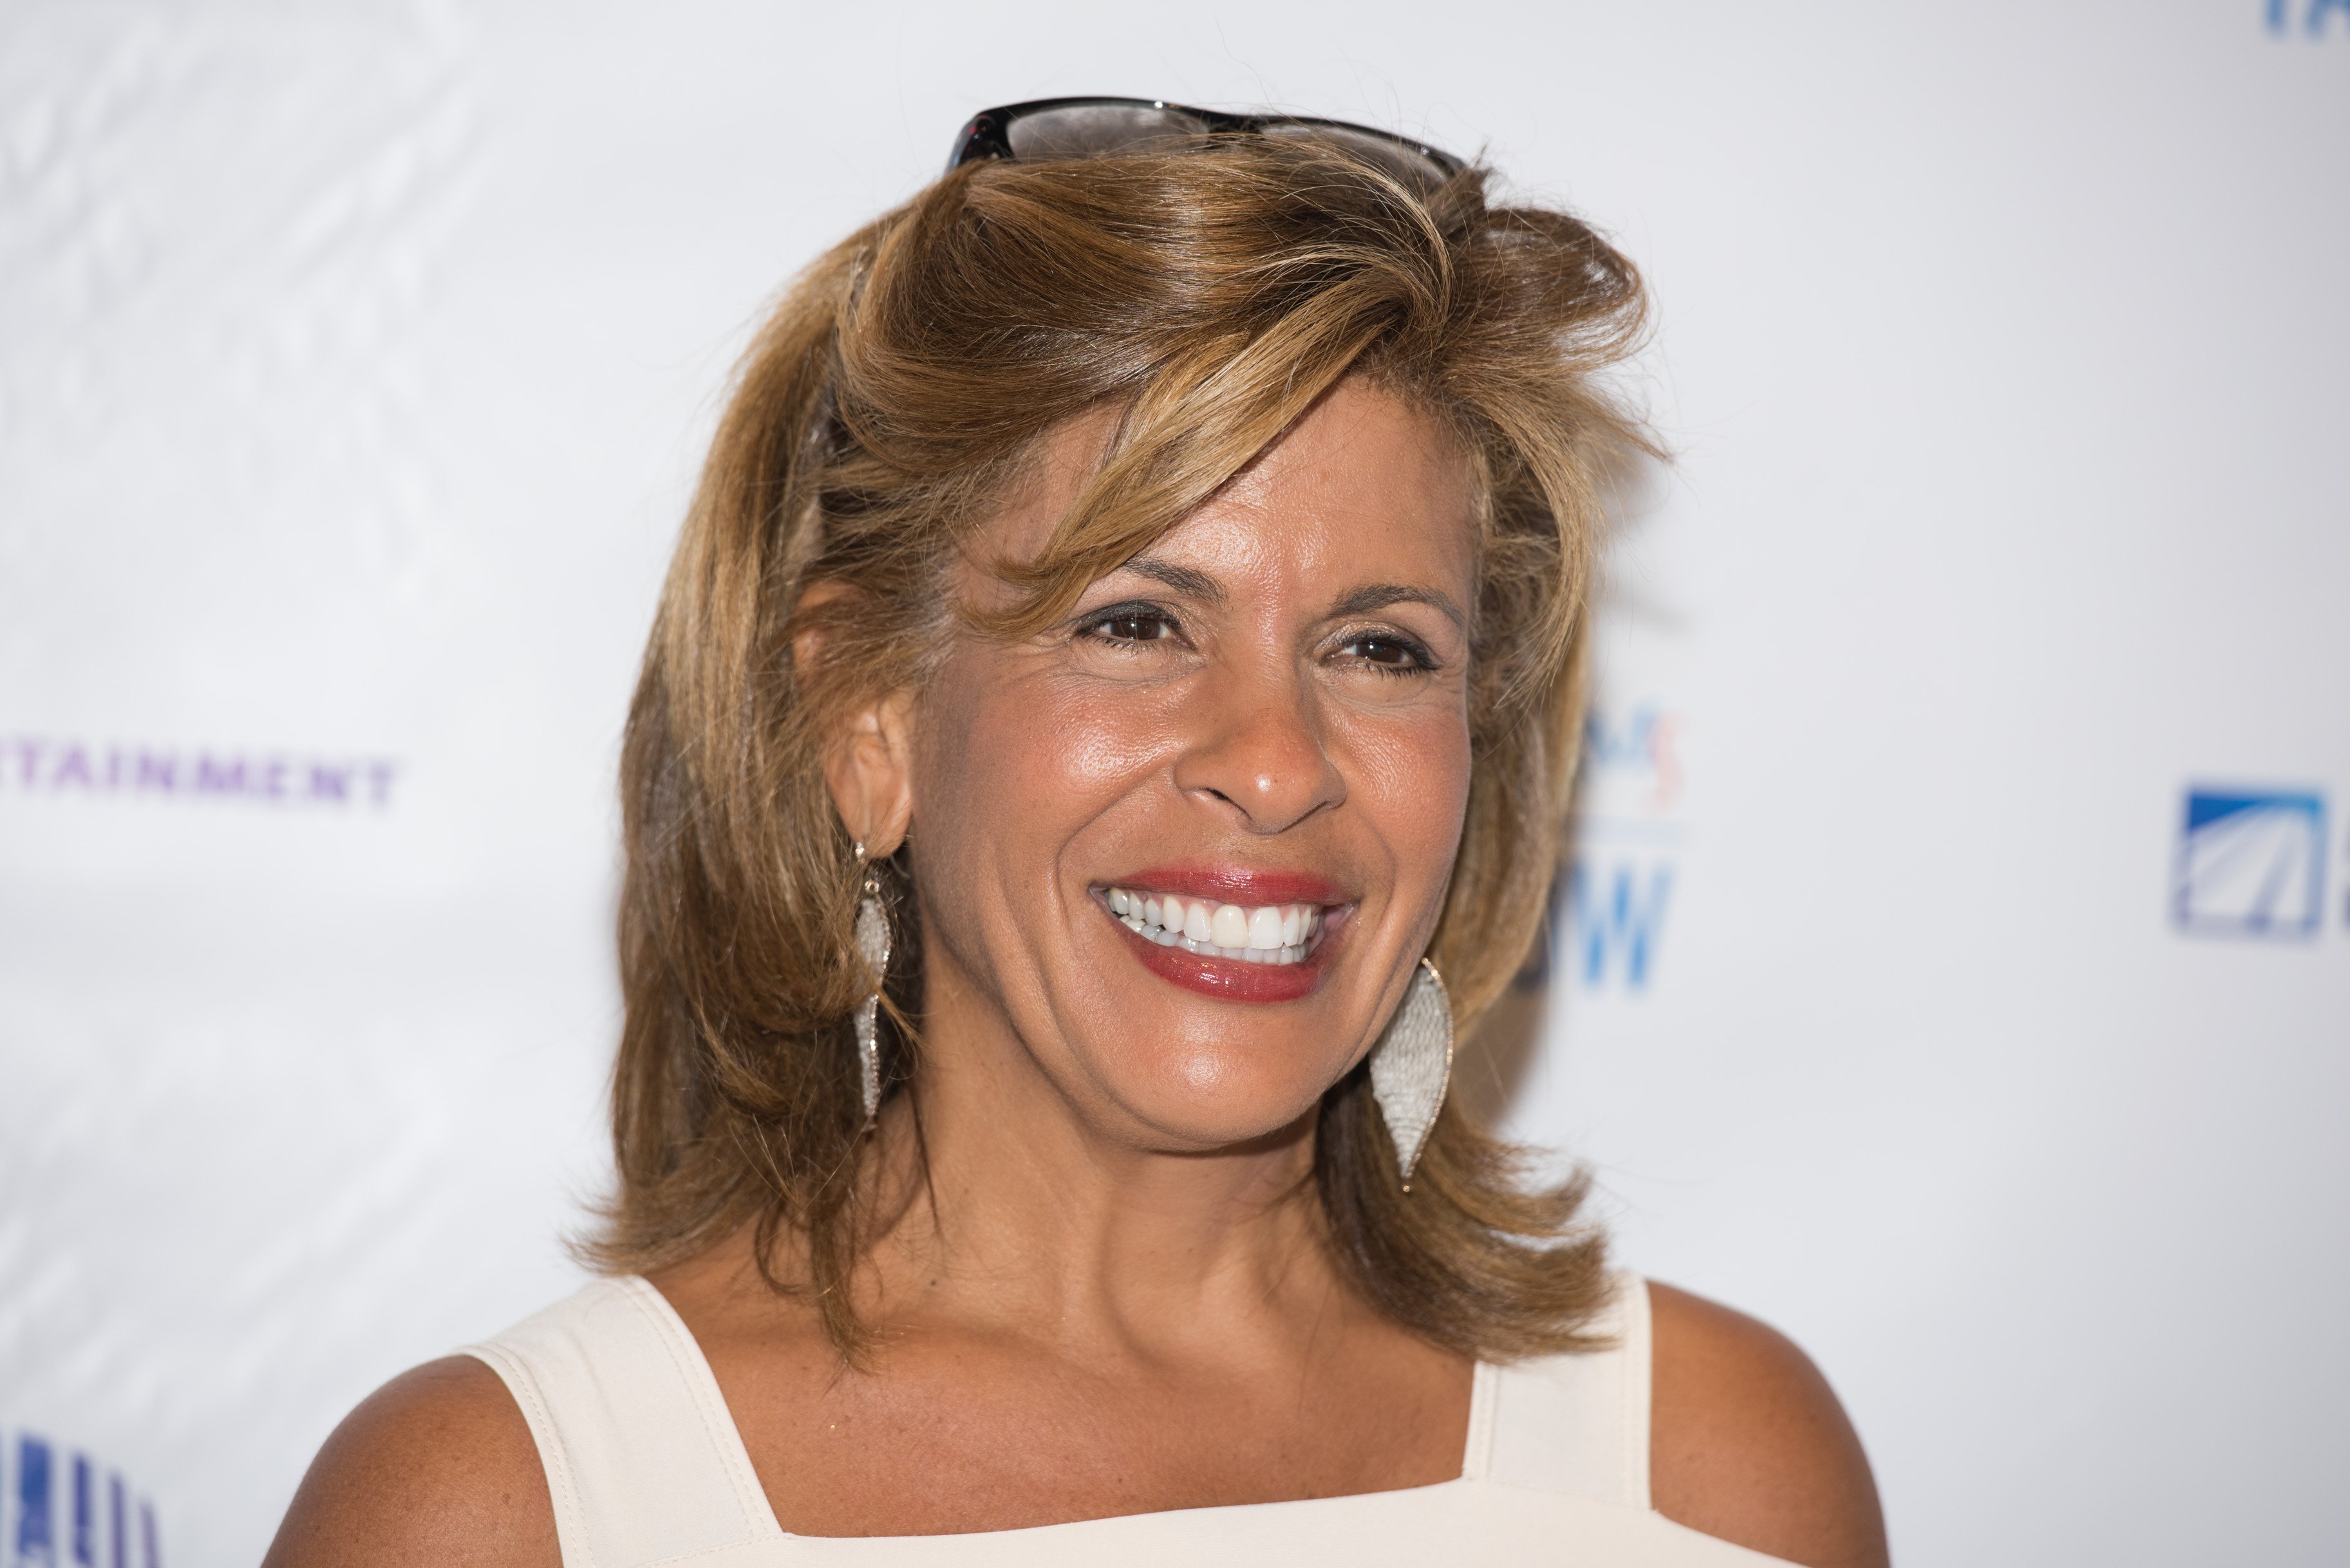 Hoda Kotb on May 28, 2015 in New York City | Source: Getty Images 